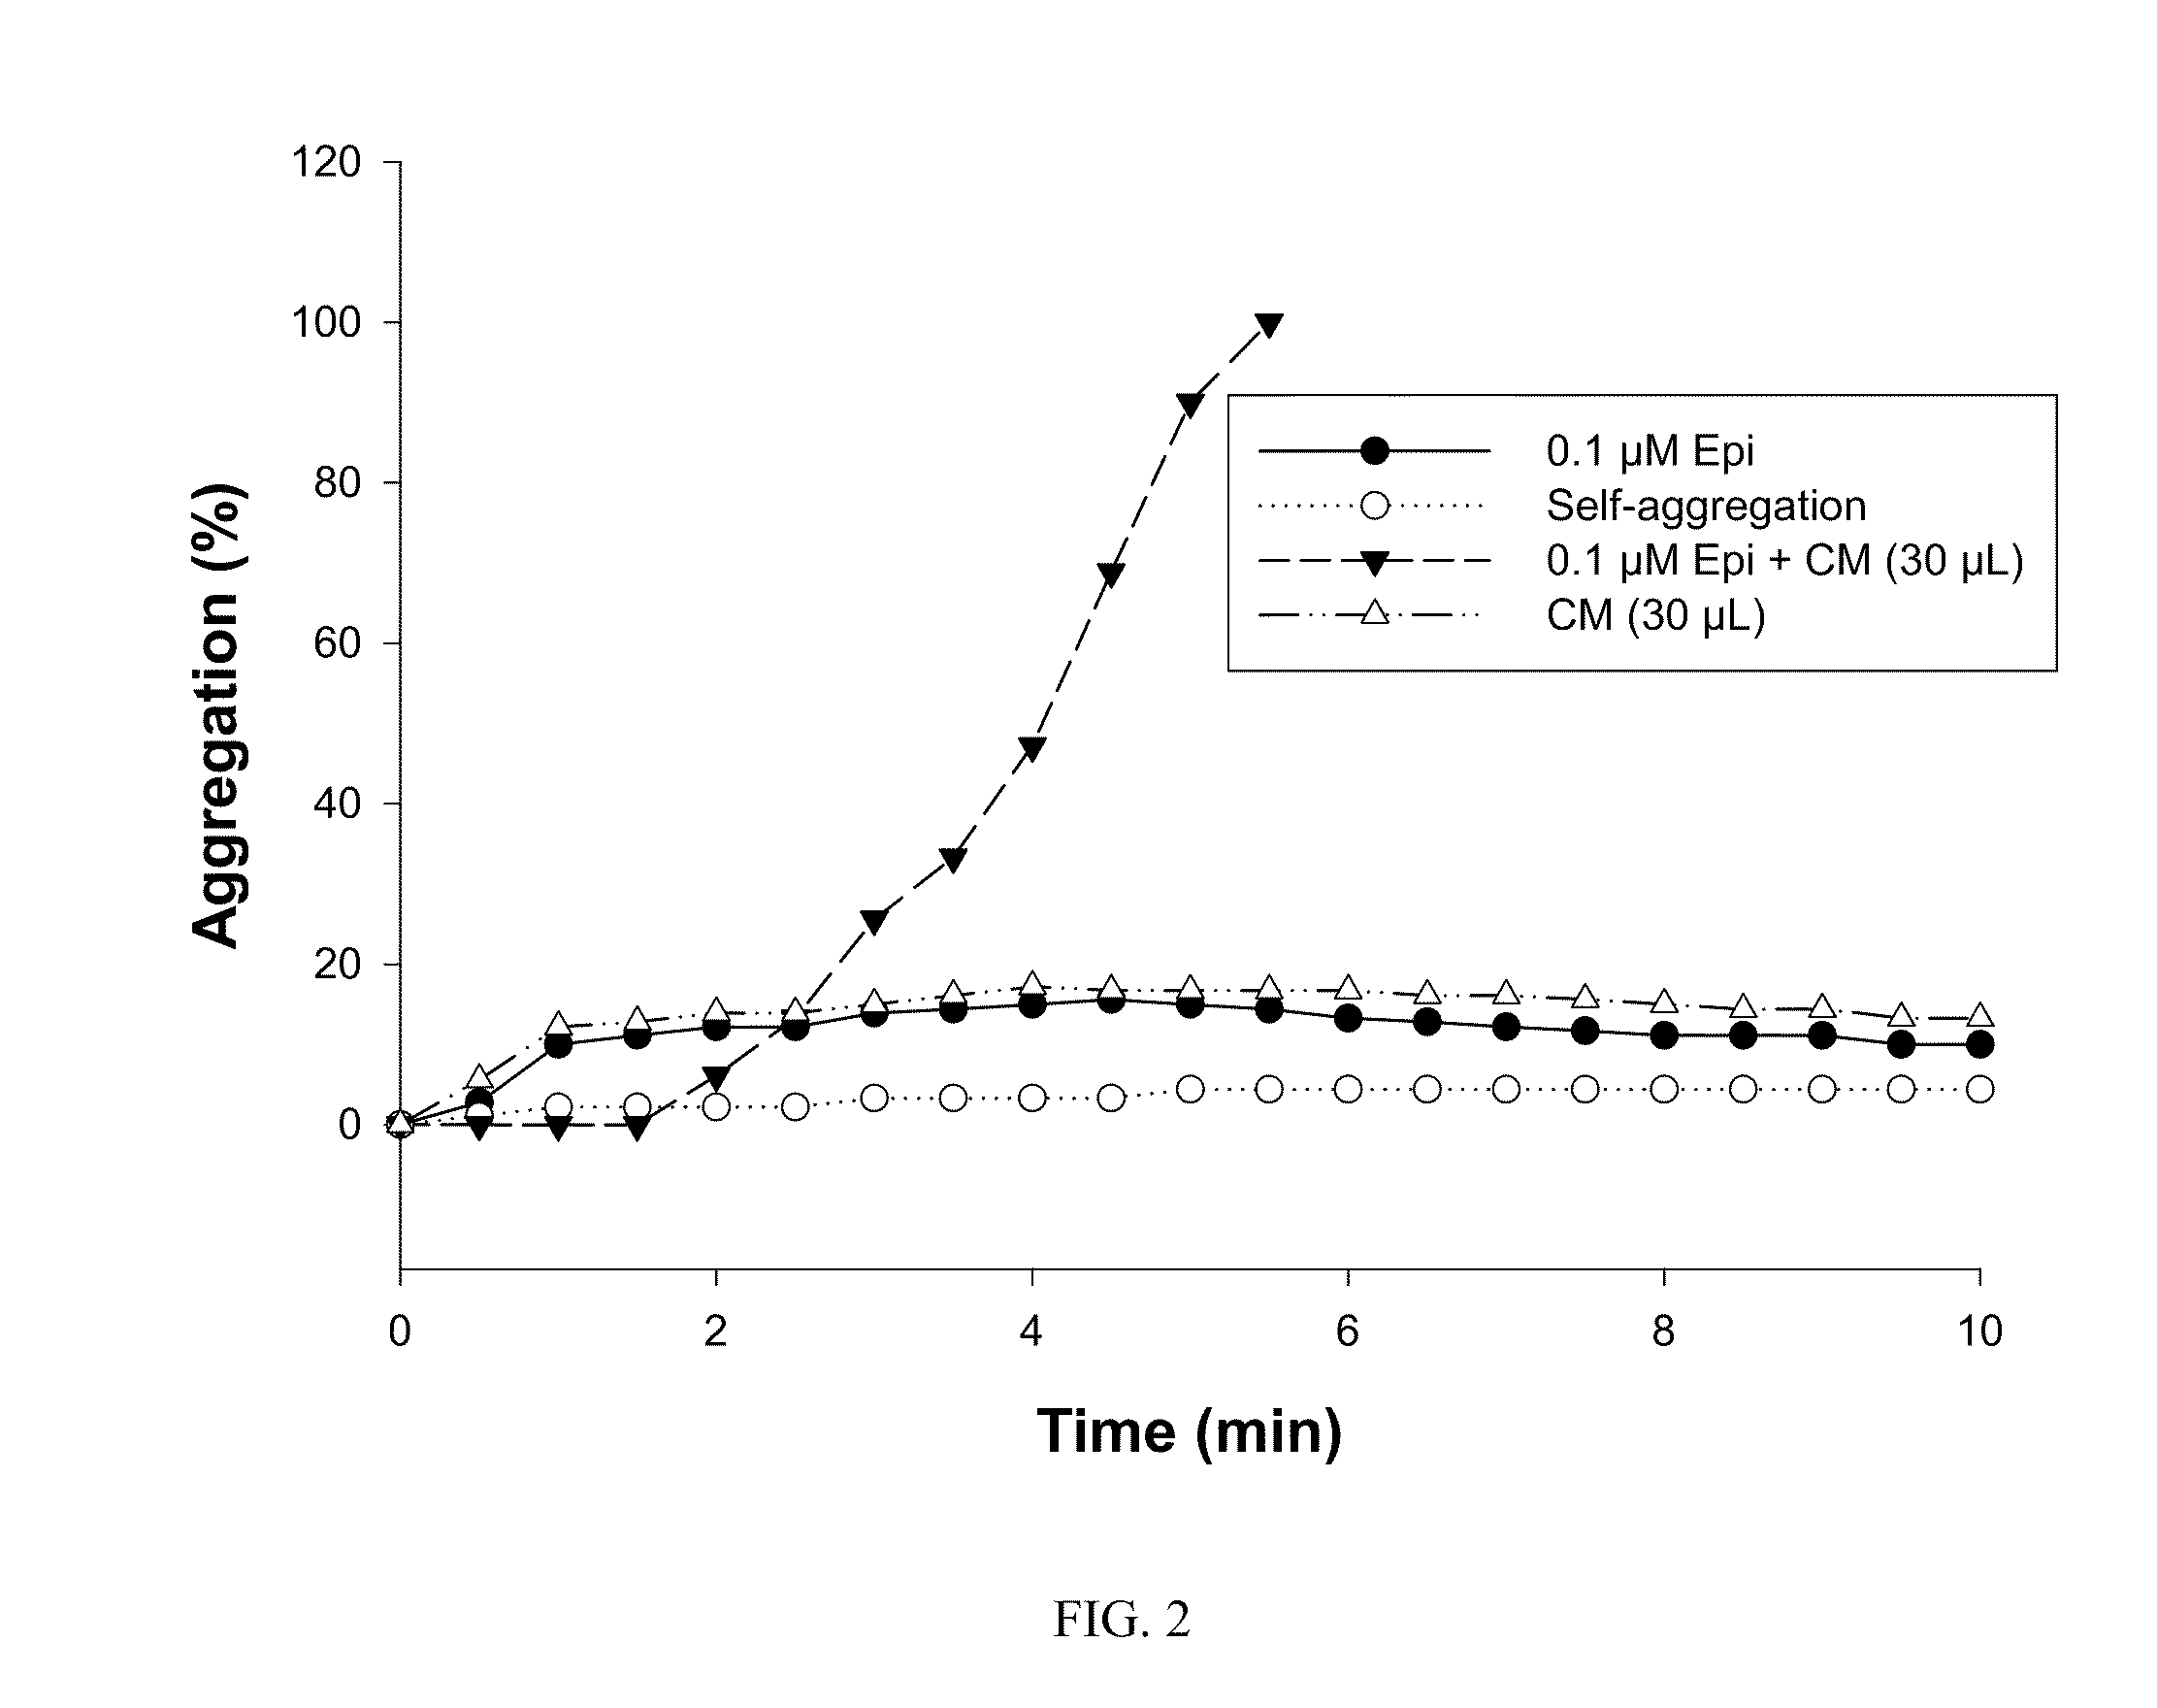 Recombinant proteins having haemostatic activity and capable of inducing platelet aggregation